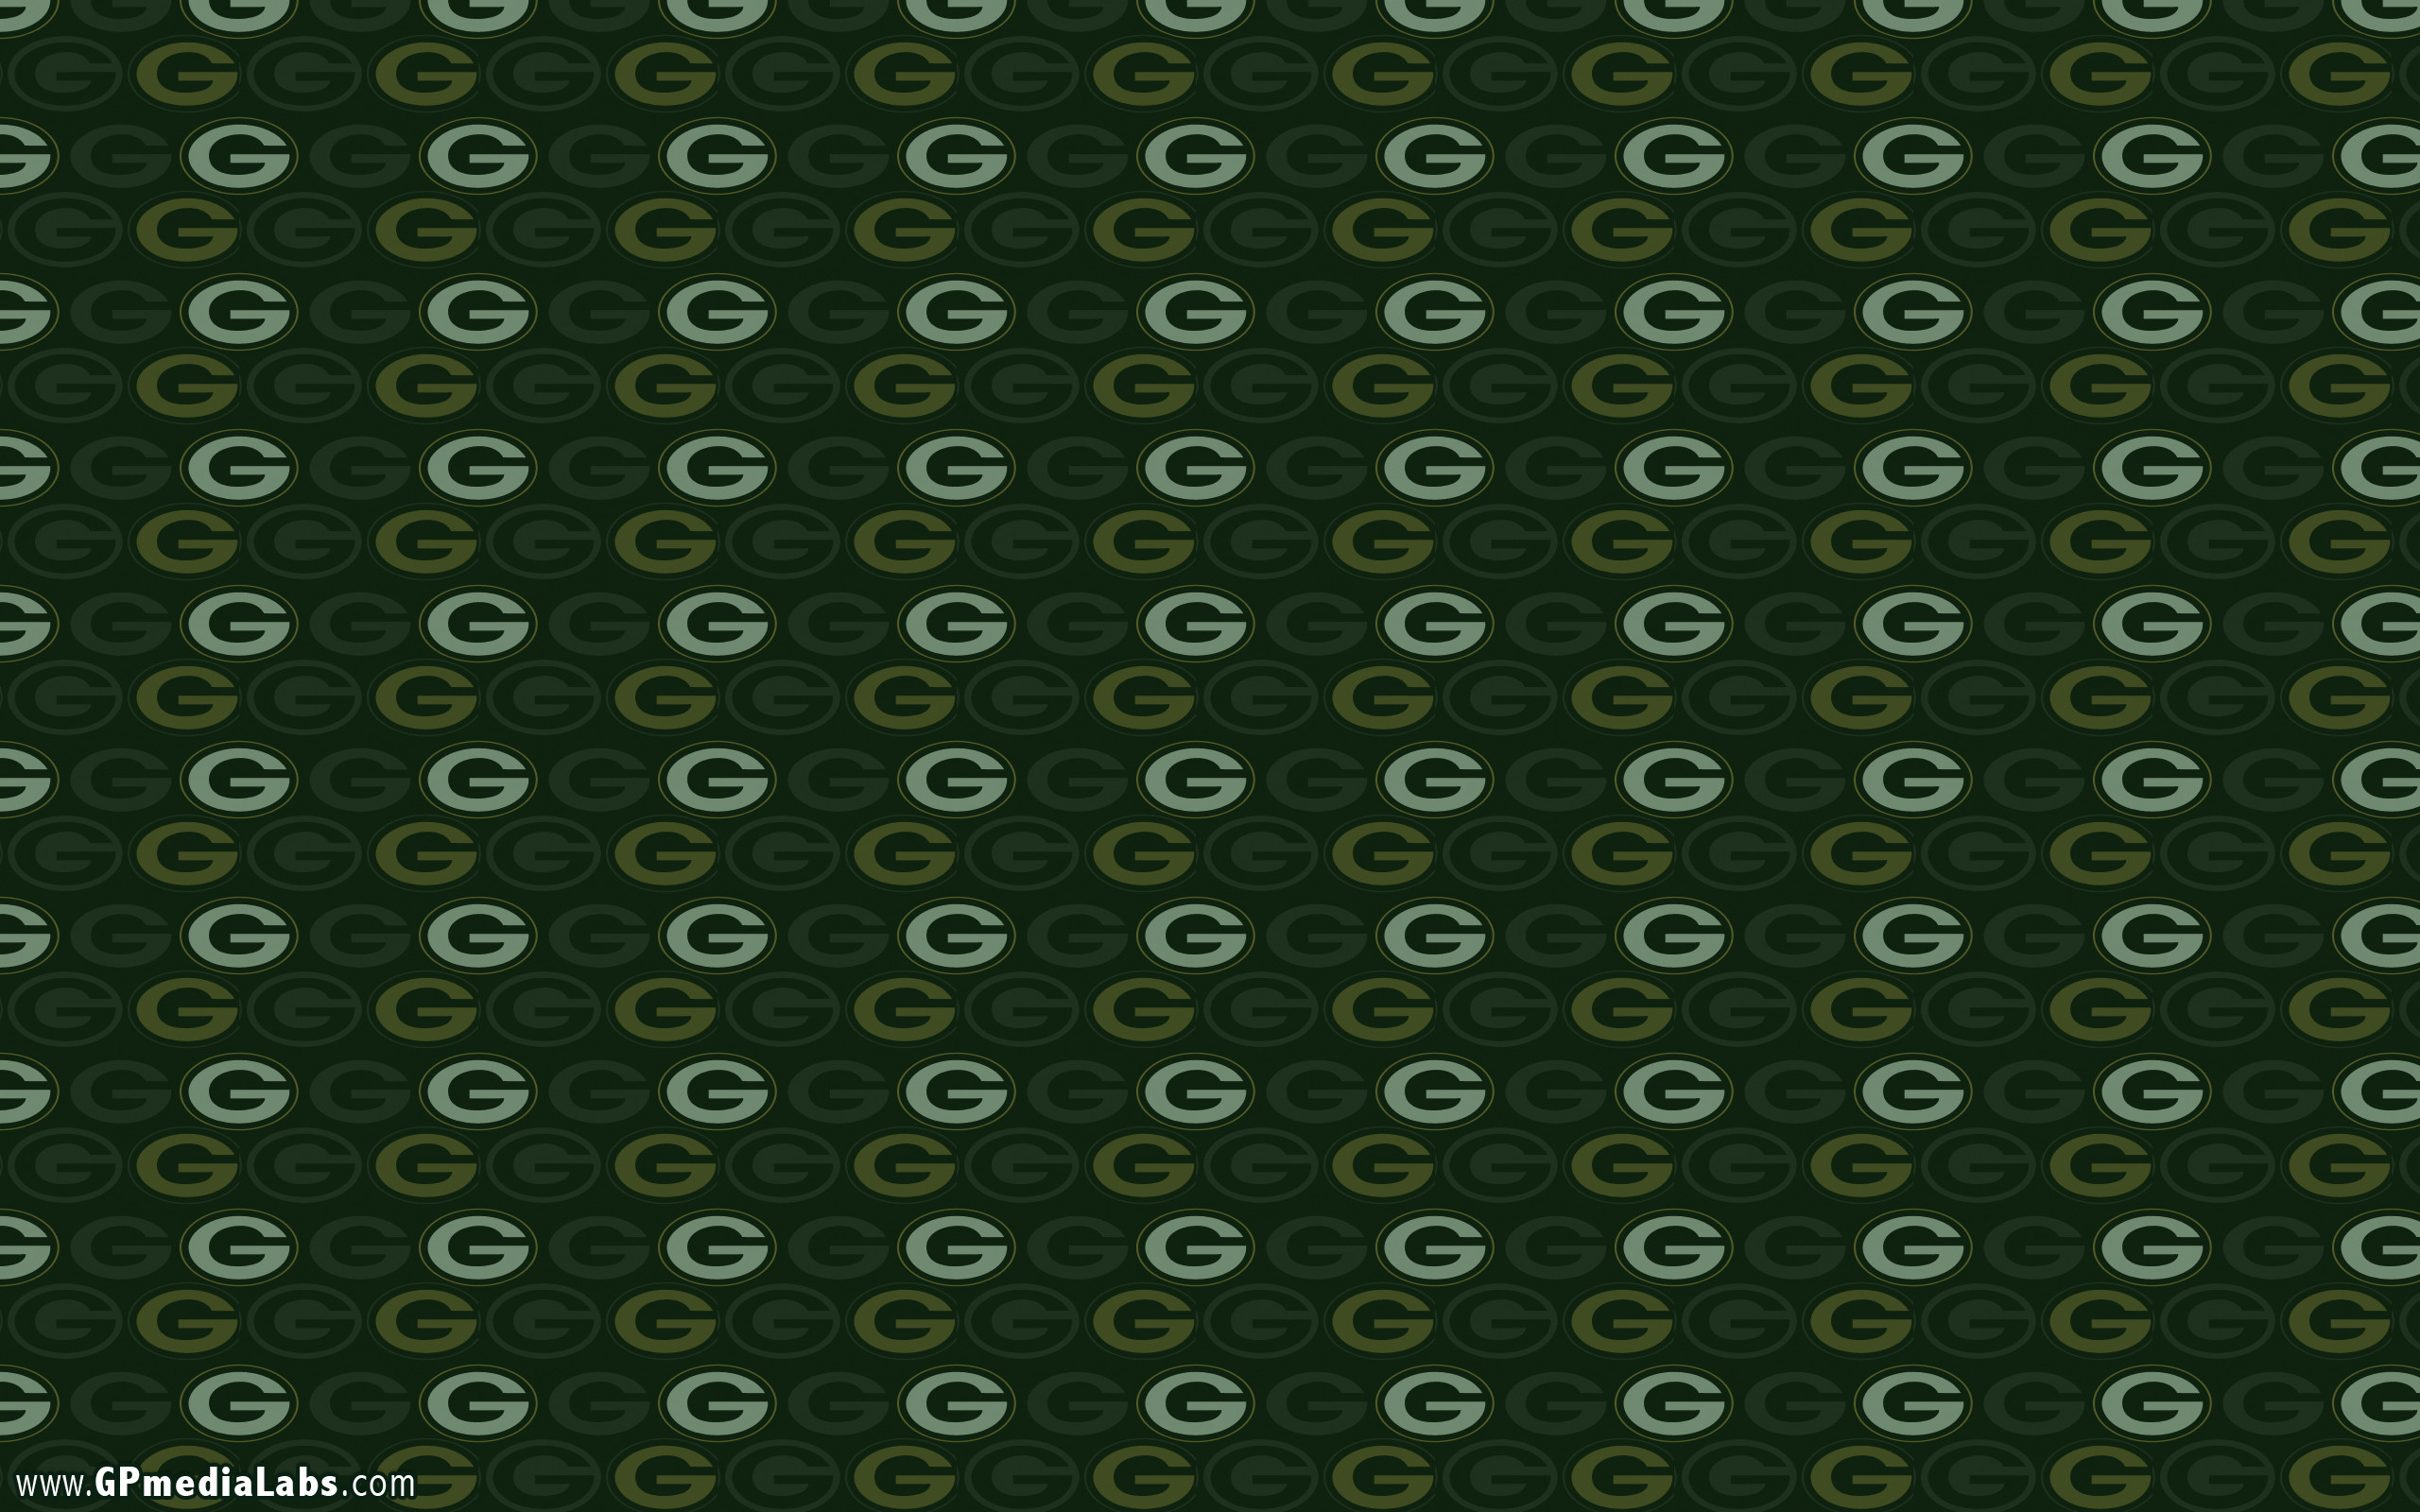 2560x1600 Download wallpaper: 1440 x 900 • 1920x1200 • 2560 x 1600. Green Bay Packers  Heat up the Frozen Tundra with Aaron Rodgers